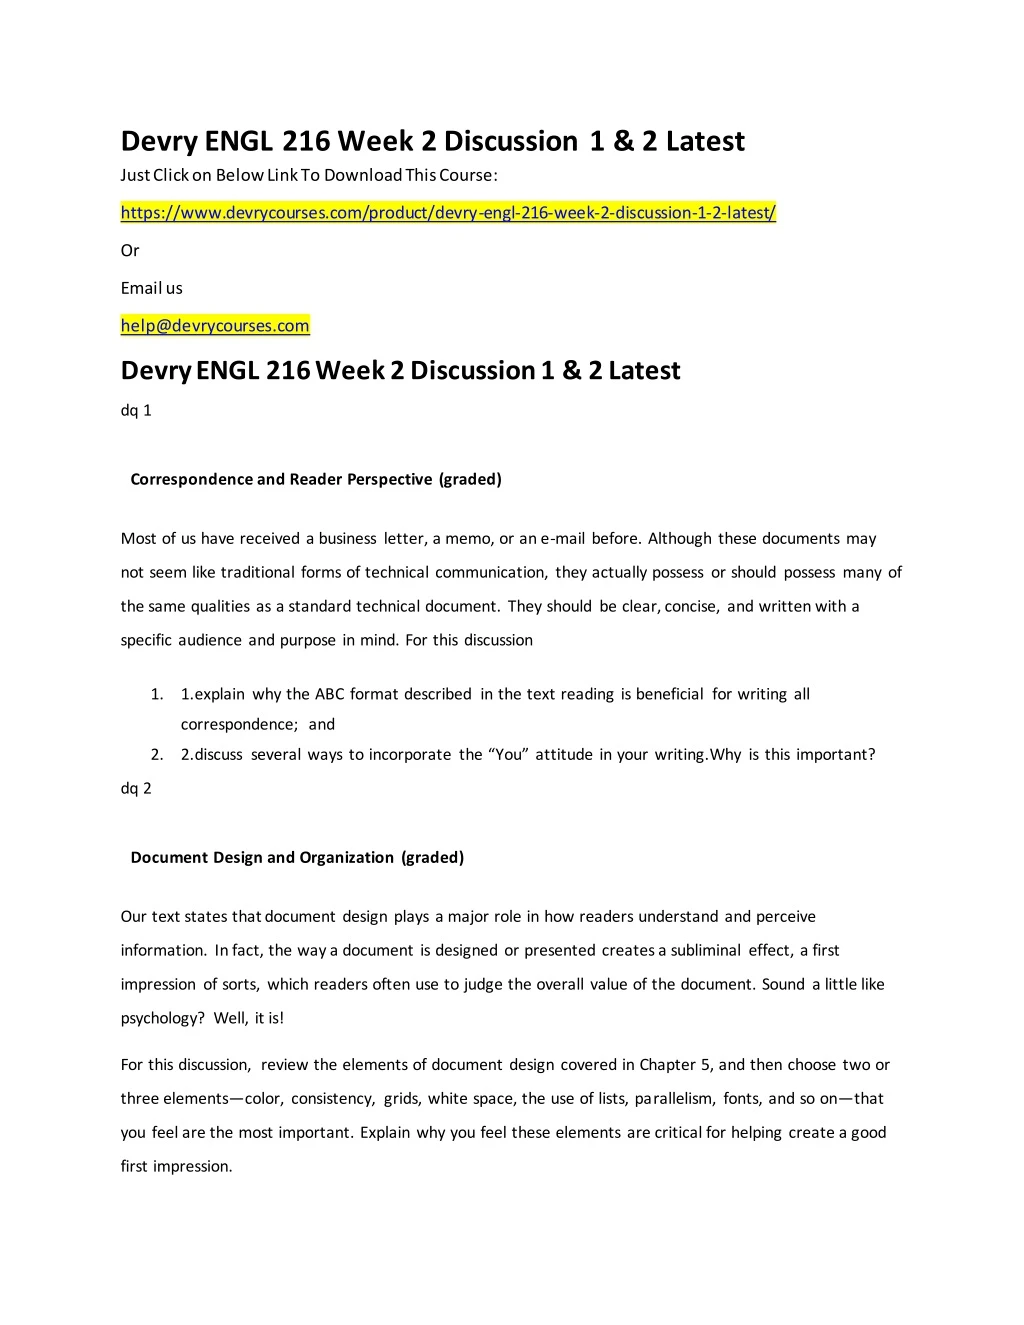 devry engl 216 week 2 discussion 1 2 latest just